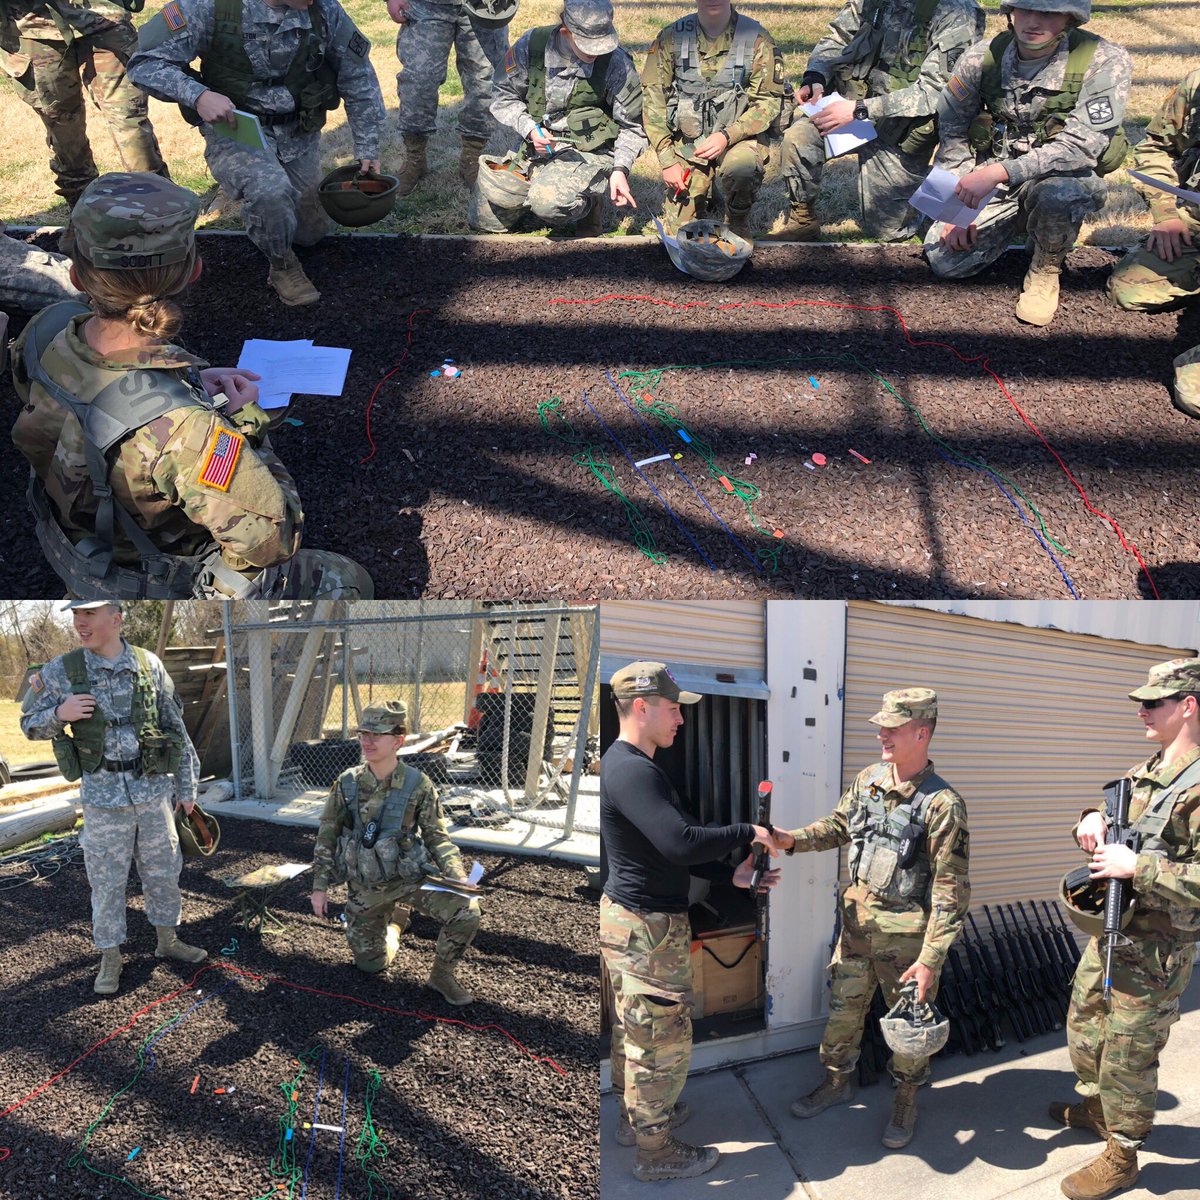 Cadets are grateful for the warm weather at lab! Seniors posing as the opposing forces better hope they don’t get caught in this ambush. #traintolead #ambush #warriorleaderswanted #psurotc #armyrotc #army